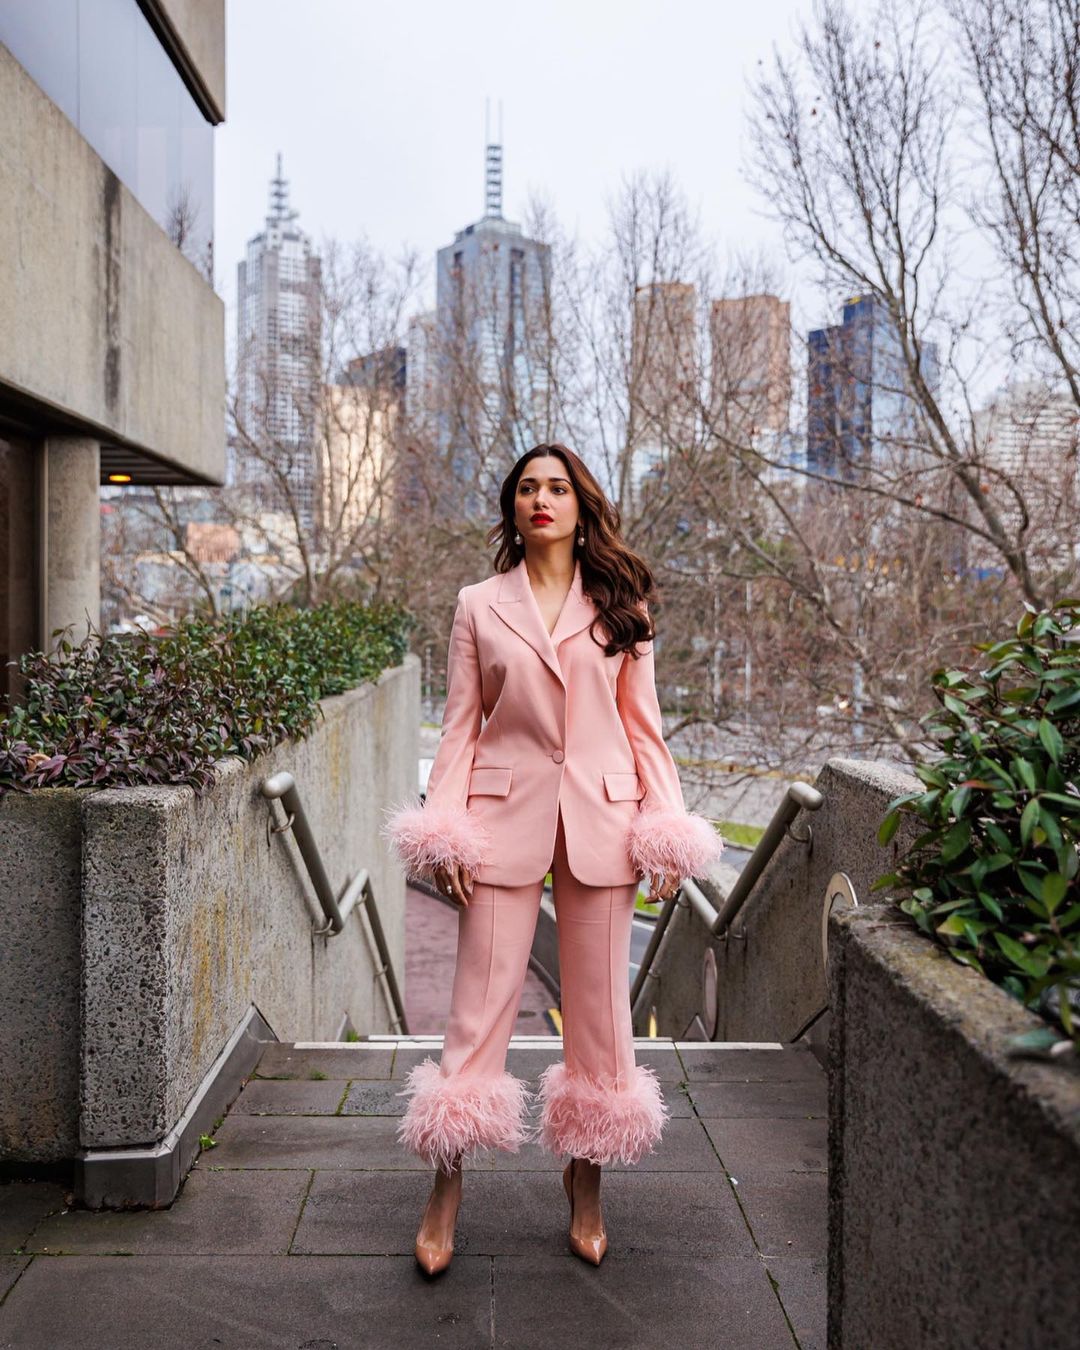 Tamannaah Bhatia in a pink pantsuit with feather highlights is a gorgeous sight to behold